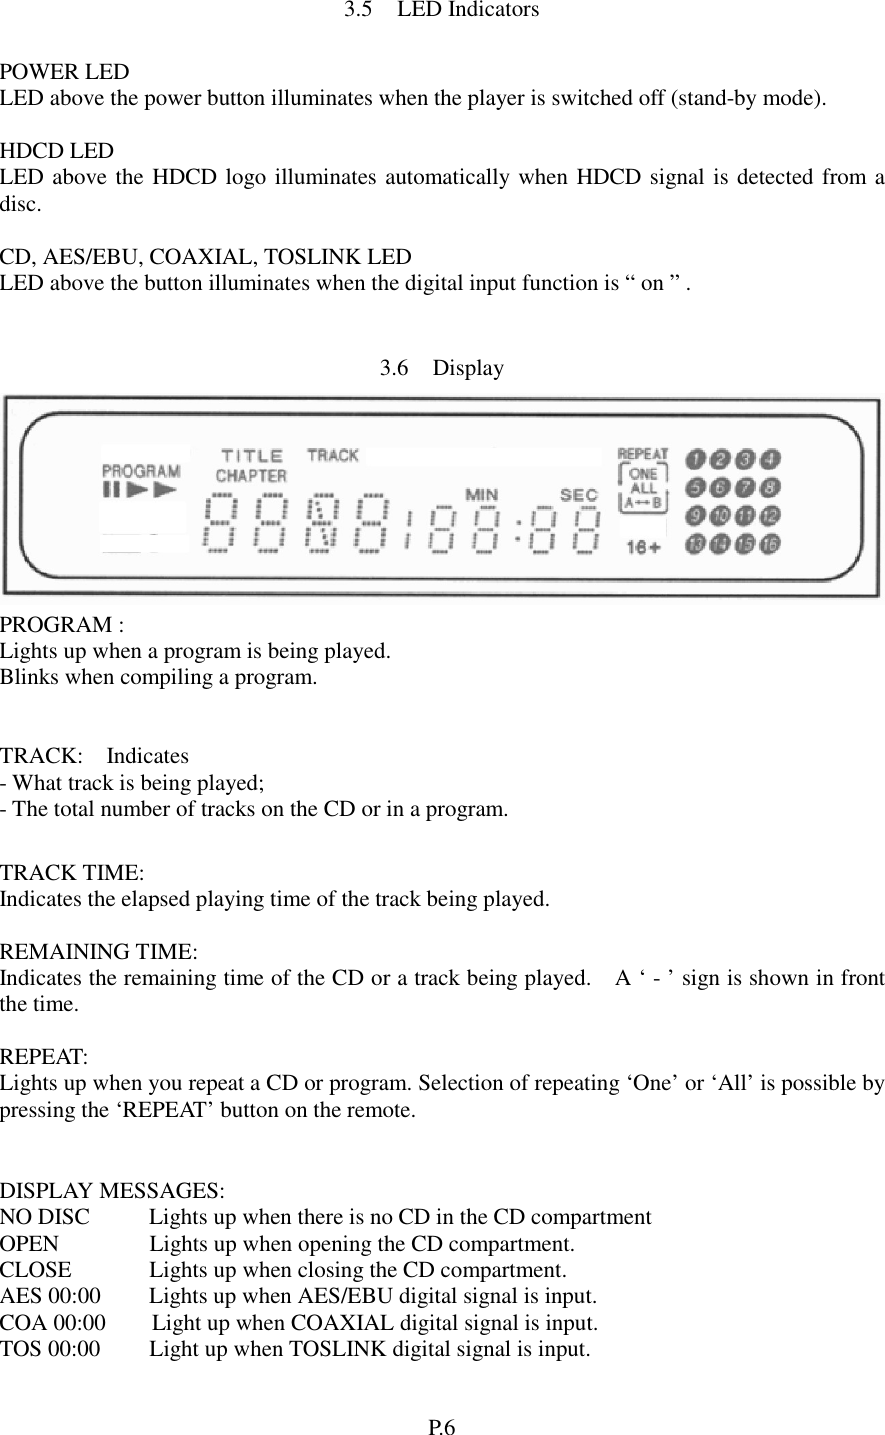 Page 7 of 12 - Cary-Audio-Design Cary-Audio-Design-Cd-200-Users-Manual- CD 306/200 Operating Manual  Cary-audio-design-cd-200-users-manual